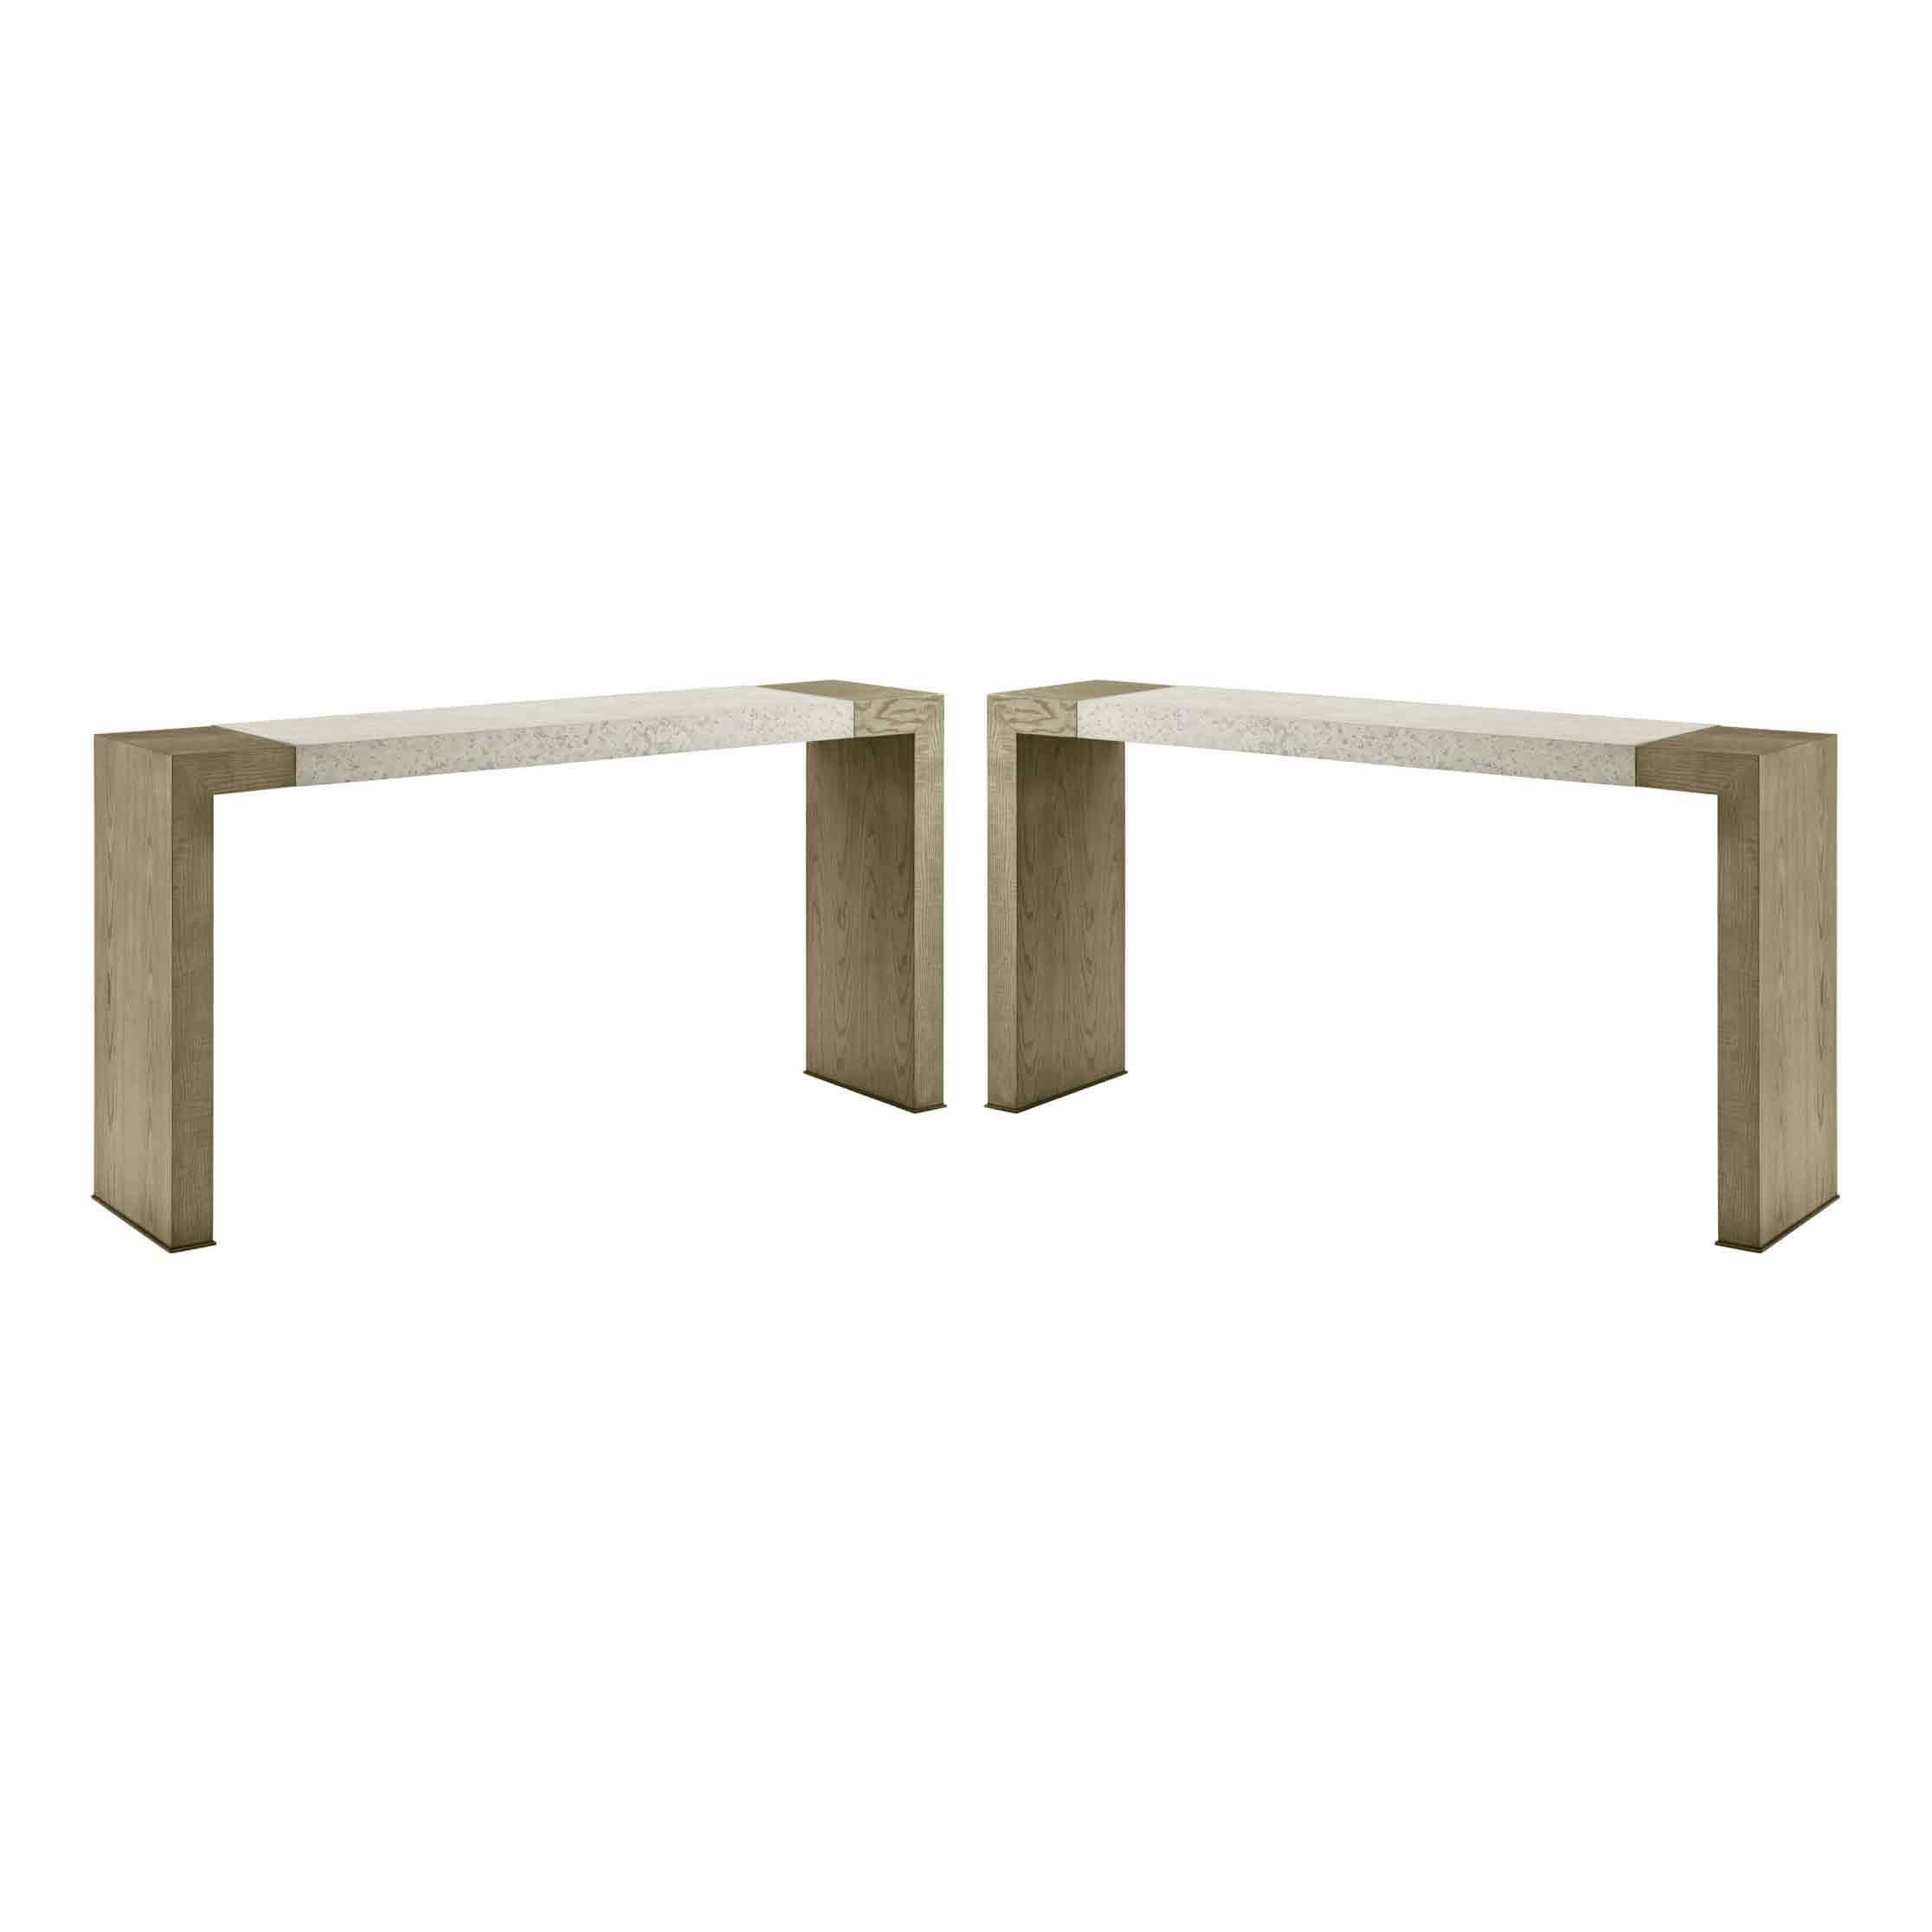 Pair of Parson Style Console Tables - Light